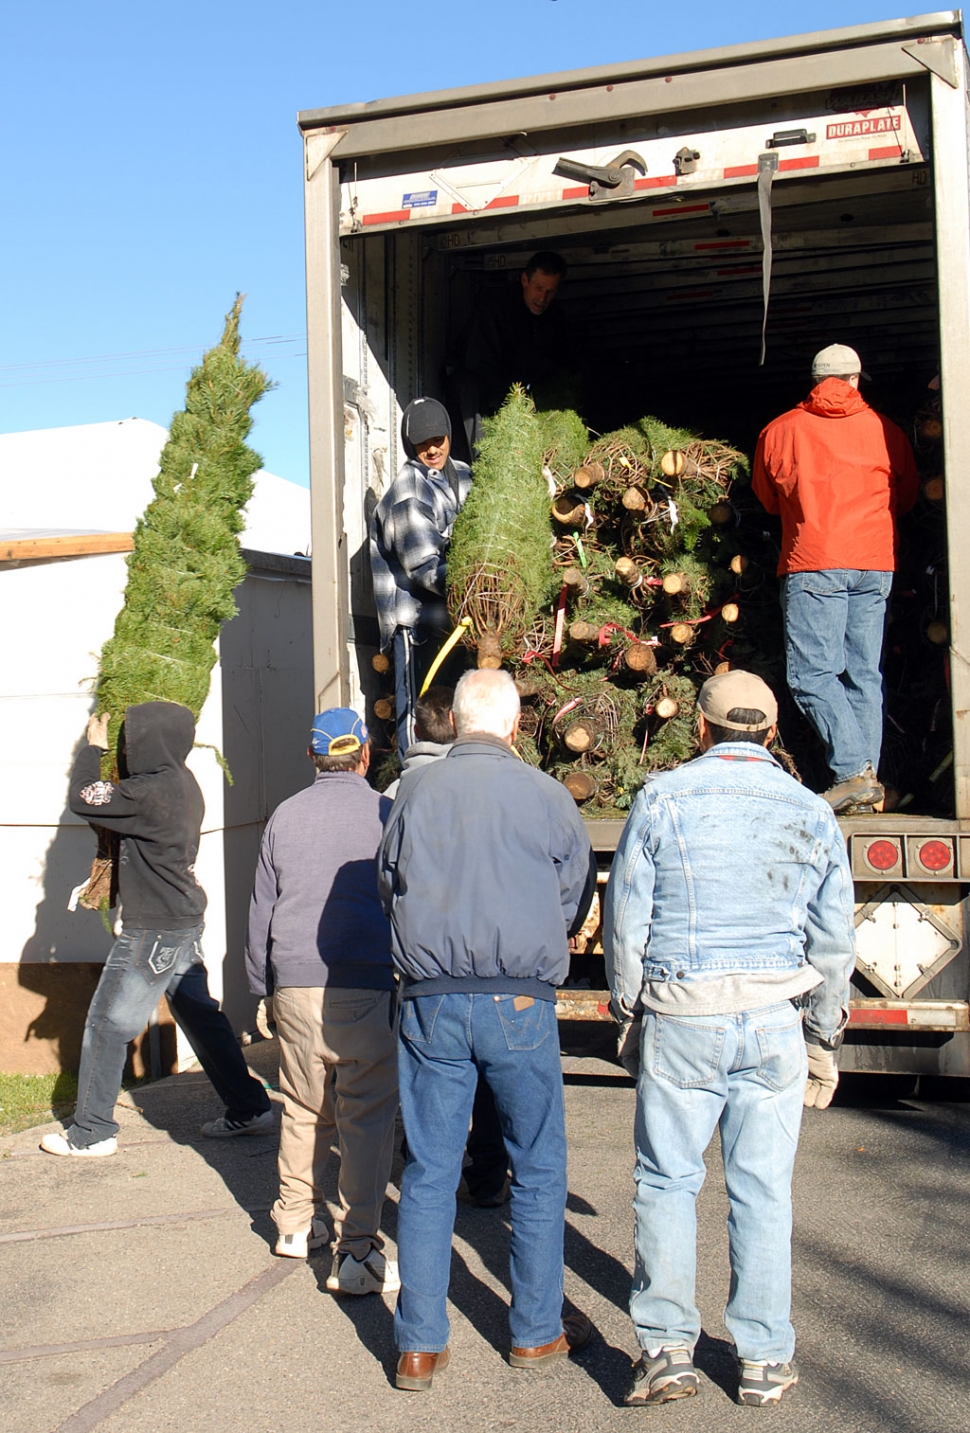 They’re fresh! They’re green! They’re for sale! Fresh Christmas trees are for sale at St. Francis of Assisi Church. Shown are volunteers unloading the tree truck.